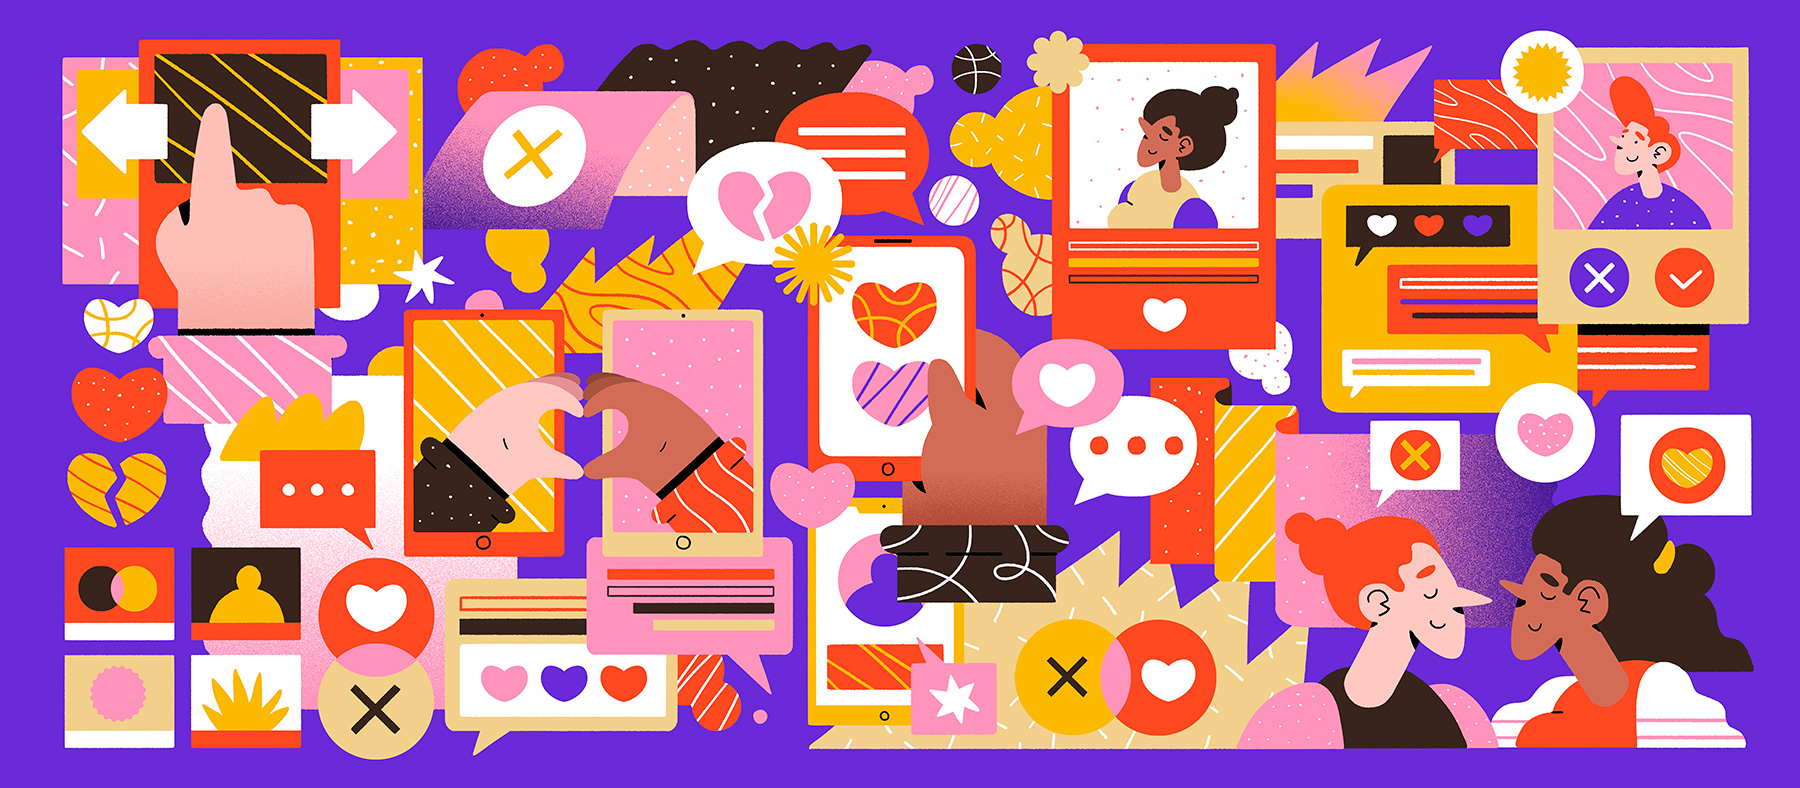 “Falling in Love with Good Design” by Lucas Wakamatsu